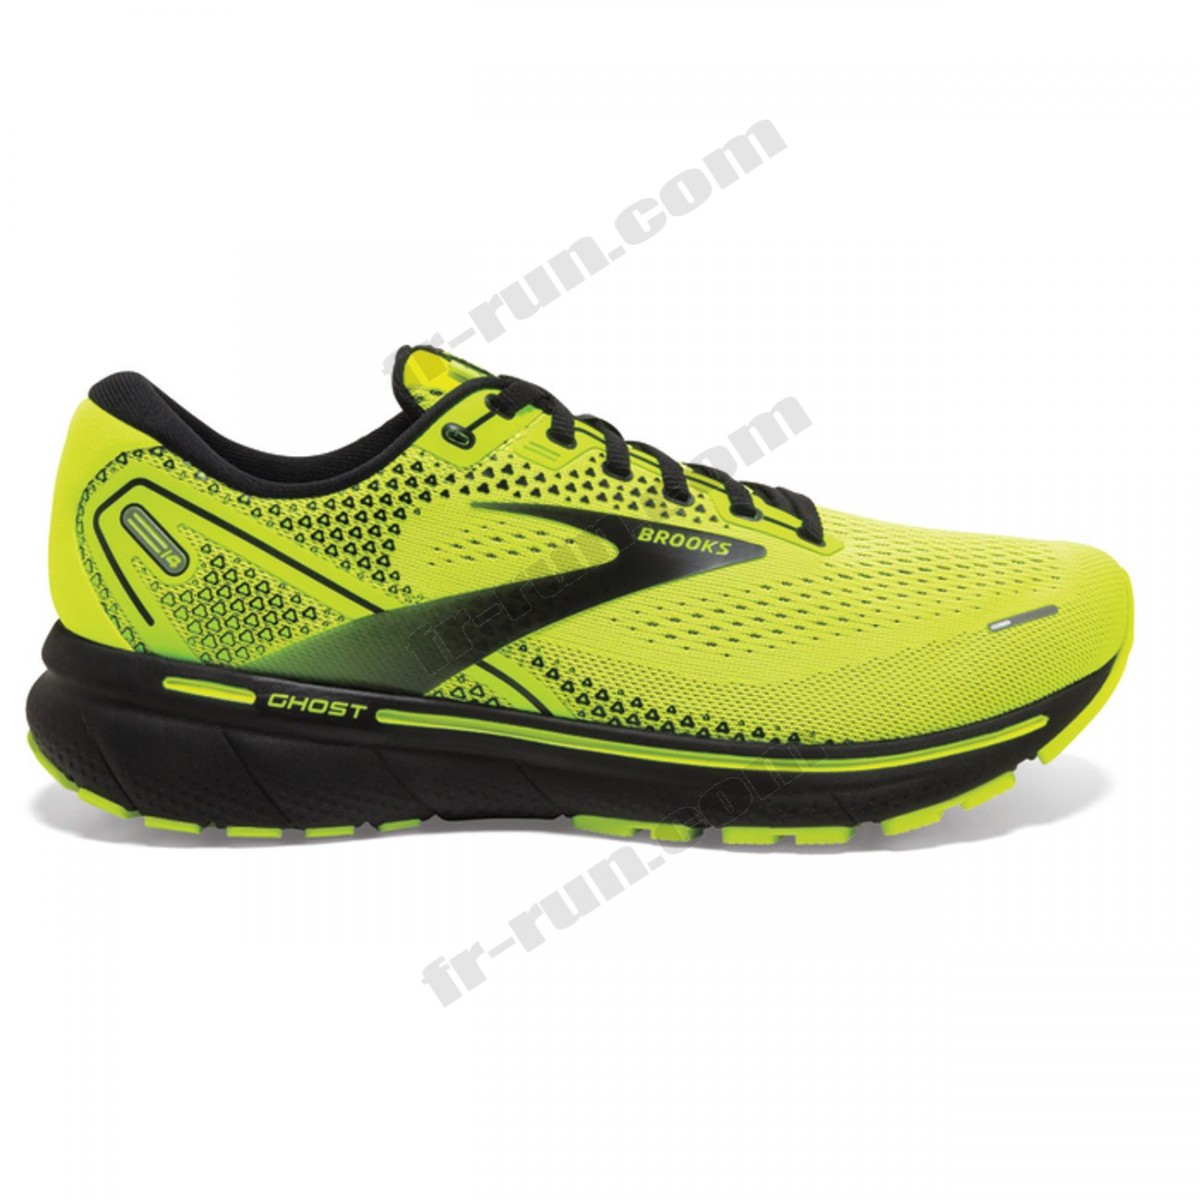 Brooks/CHAUSSURES DE RUNNING homme BROOKS GHOST 14 √ Nouveau style √ Soldes - -1